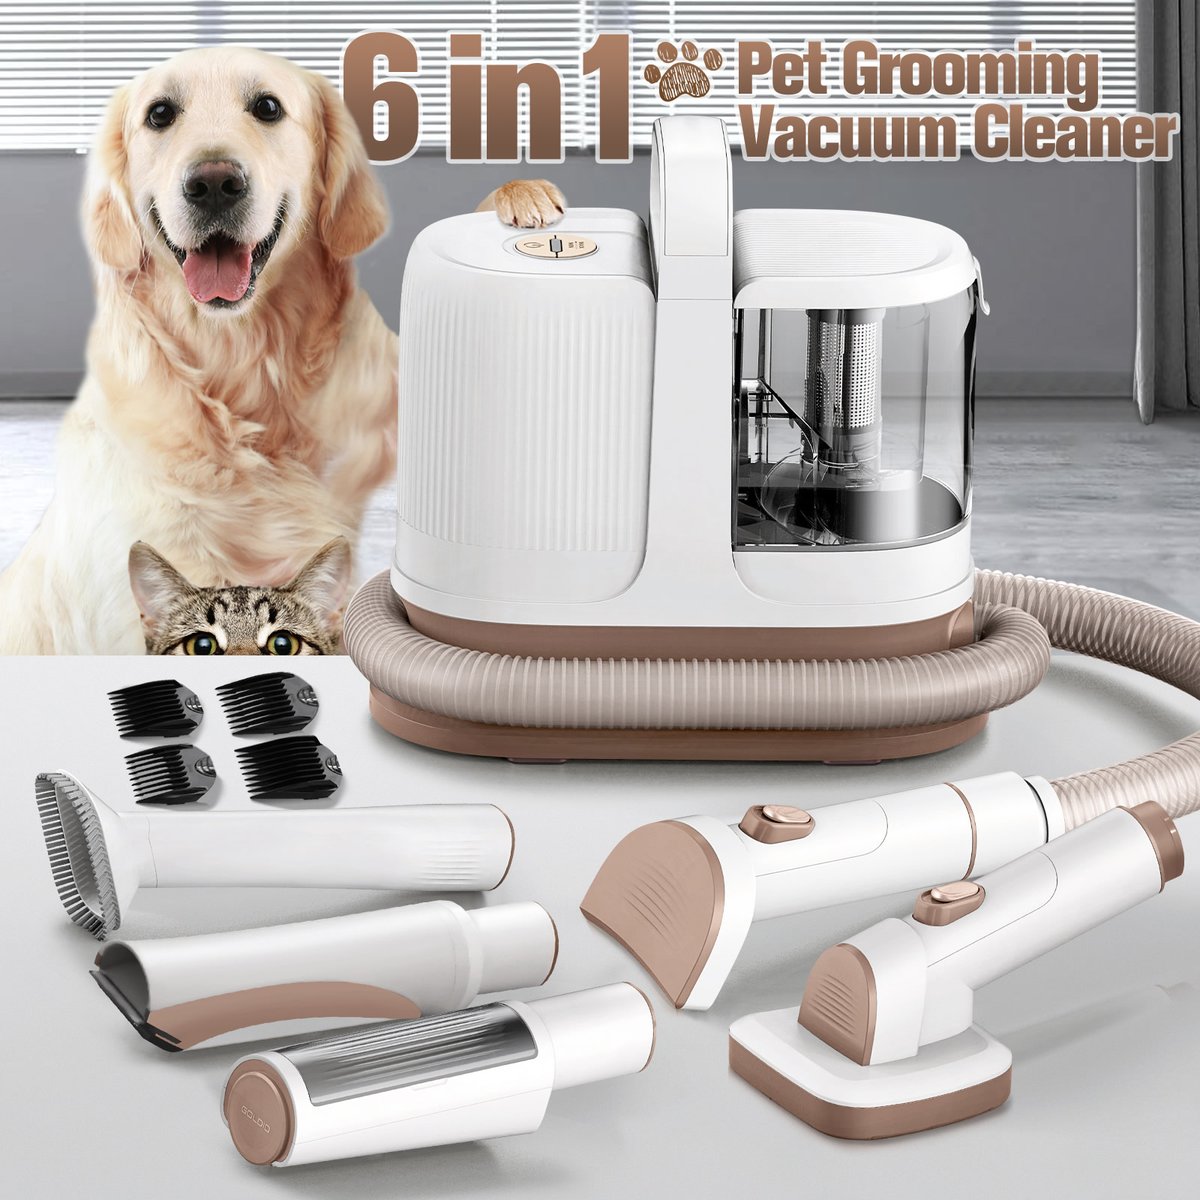 Pet Grooming Tools Vacuum Dog Cat Hair Remover Deshedding Brush bit.ly/3NGGHen #catgrooming #petgrooming #groomingtools #doghaircut #cathair #petlovers #hairremover #hairtrimmer #cat #dog